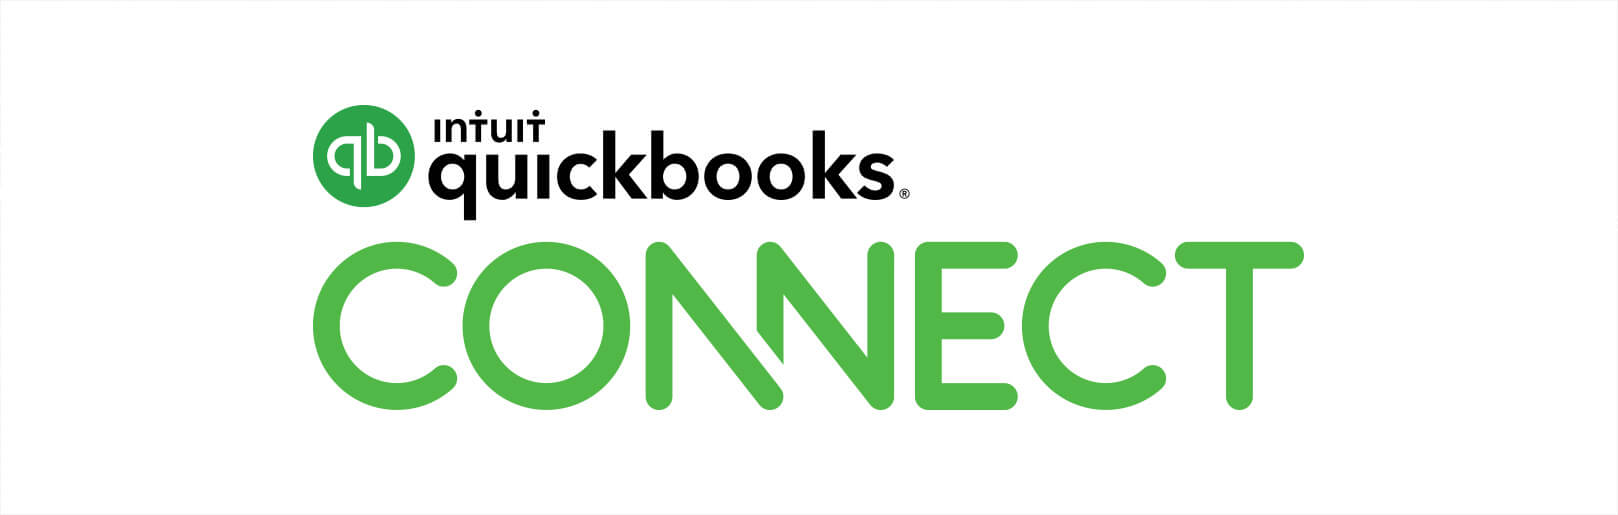 QuickBooks Connect 2019 Review